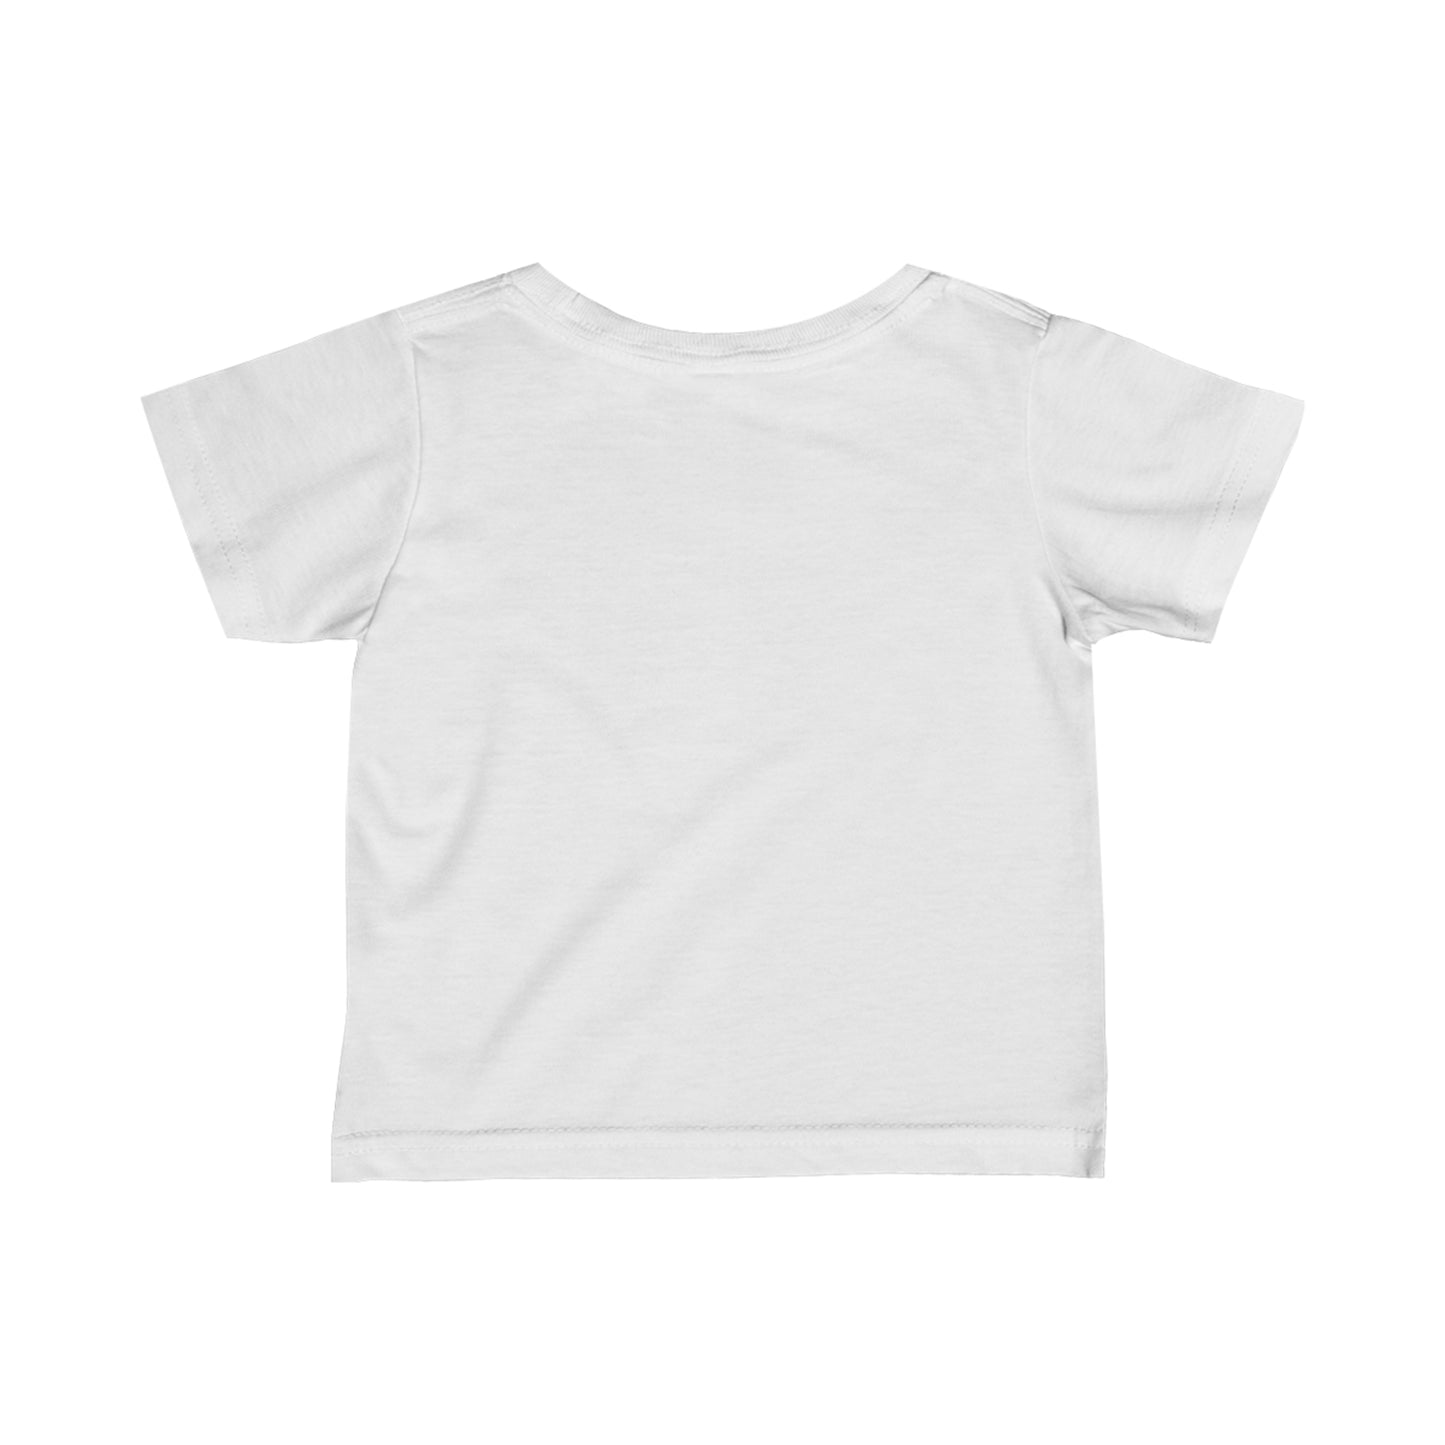 Infant 'He Promised' Tee